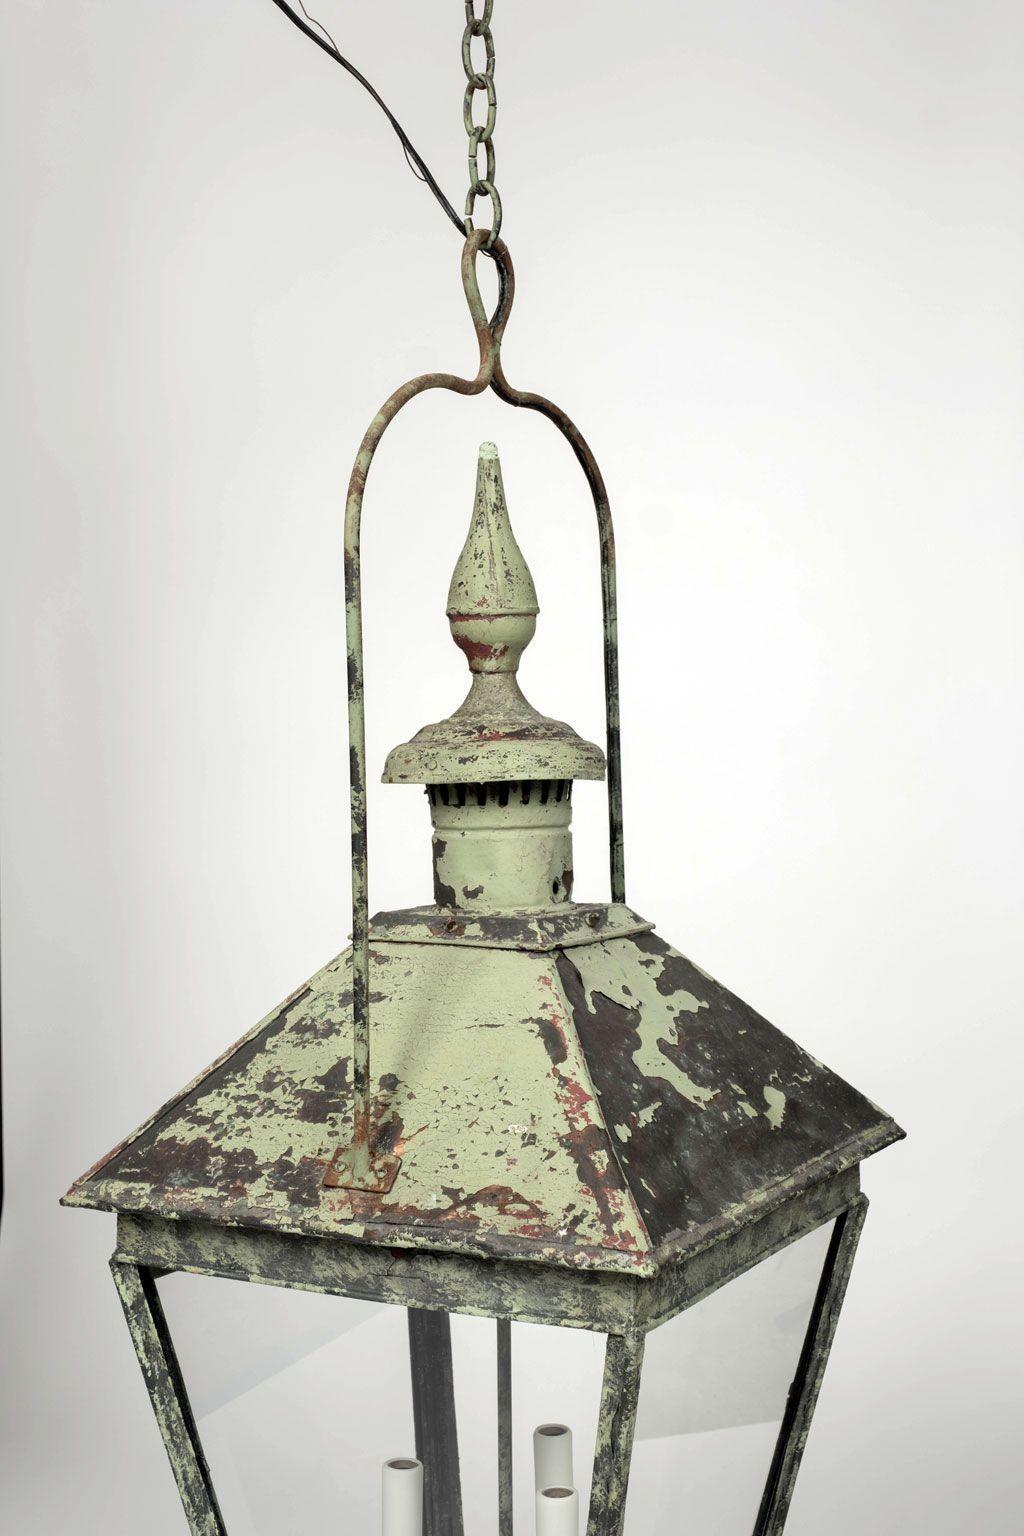 Hand-Crafted 19th Century French Green-Painted Copper and Glass Paneled Lantern For Sale